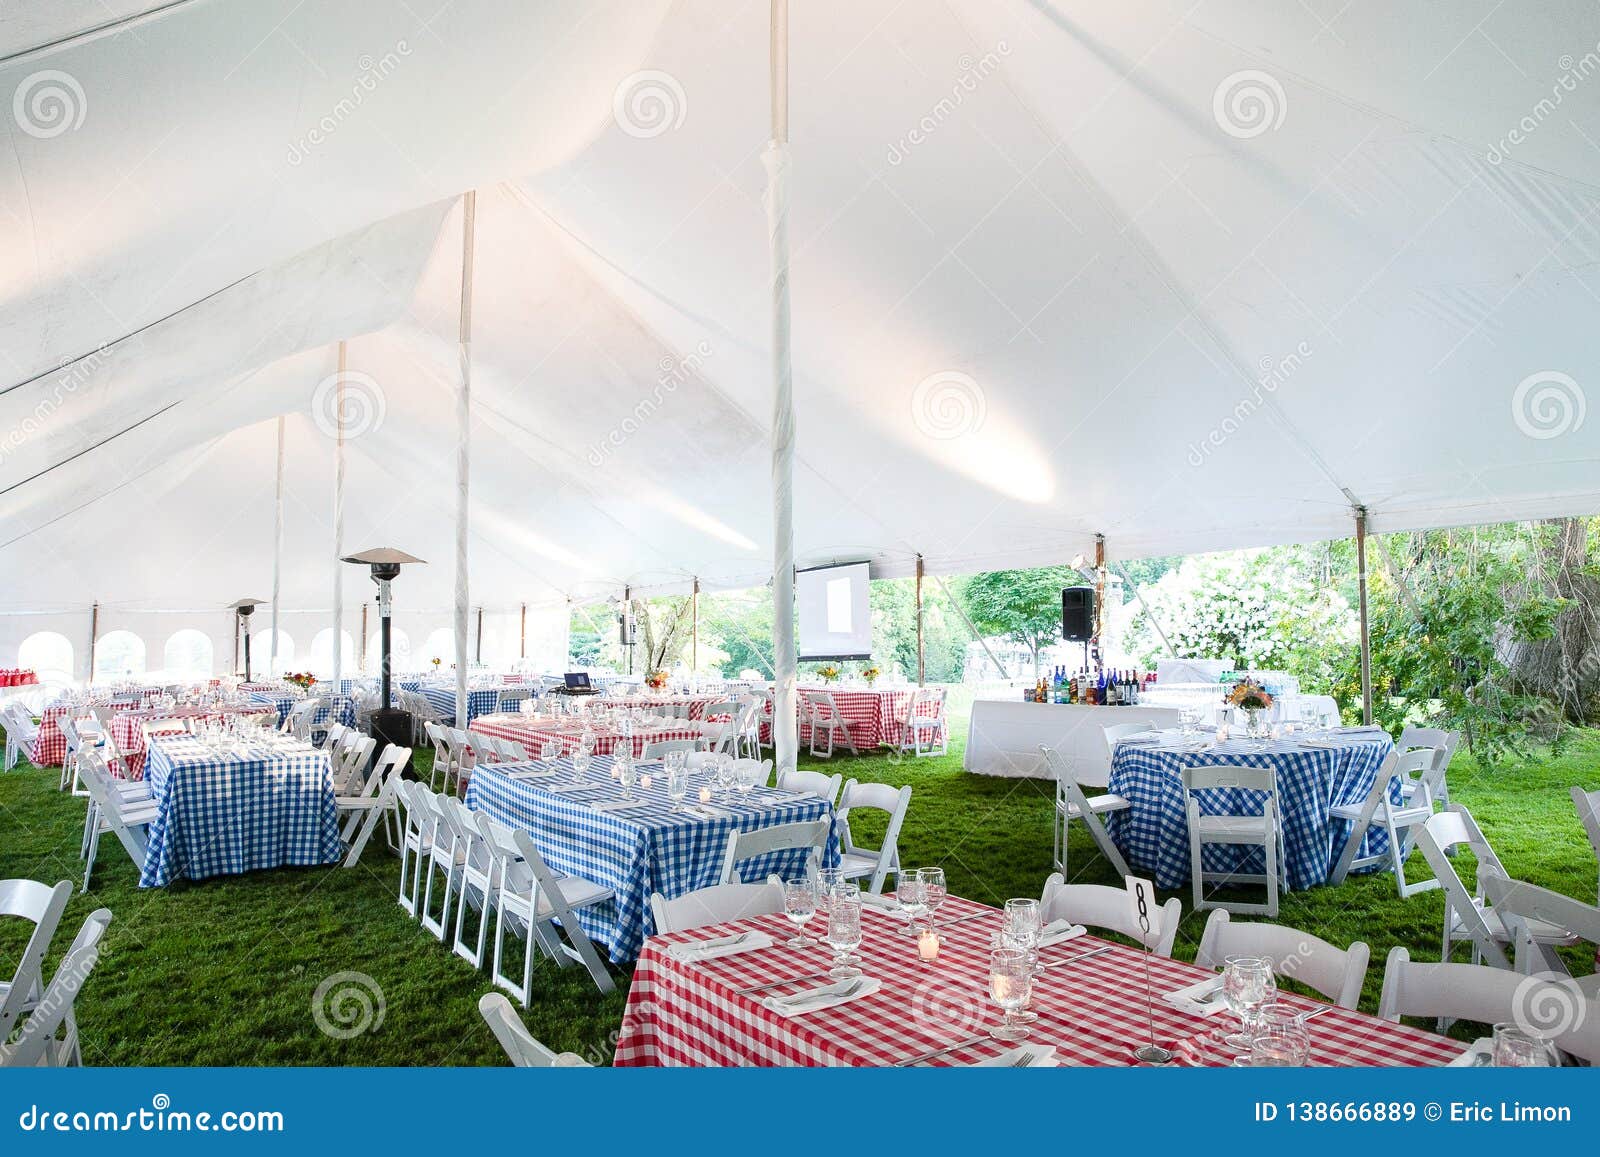 wedding or special event tables set up for an outdoor barbeque with red and blue checkered table clothes under an event tent